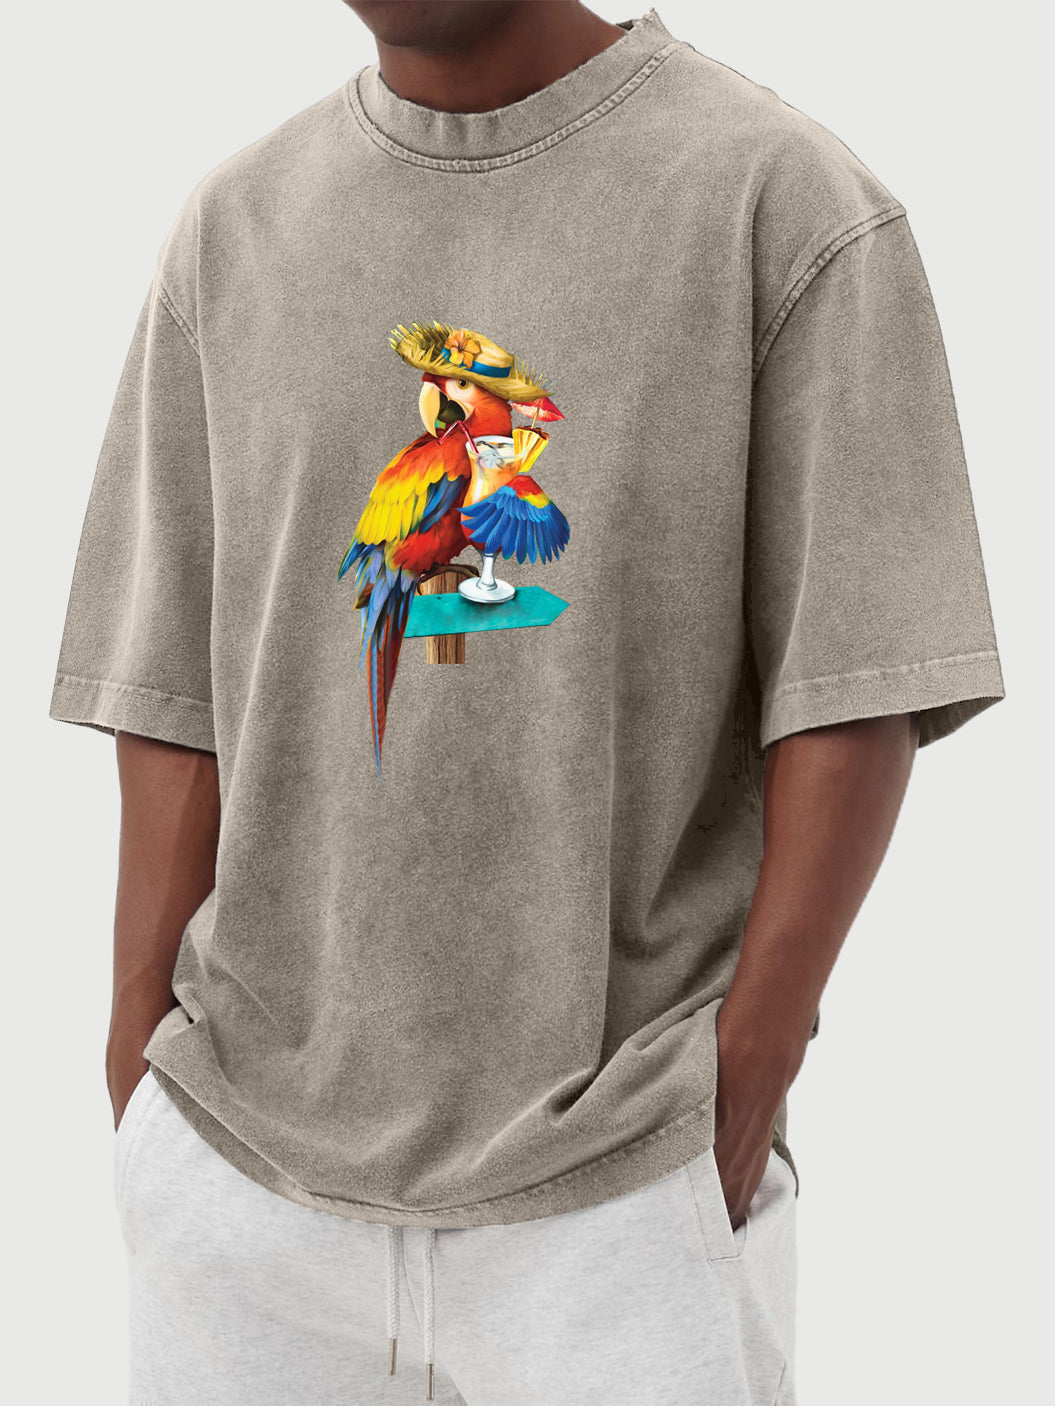 Men's Parrot Cocktail Hawaiian Print Washed Distressed Cotton T-Shirt Top